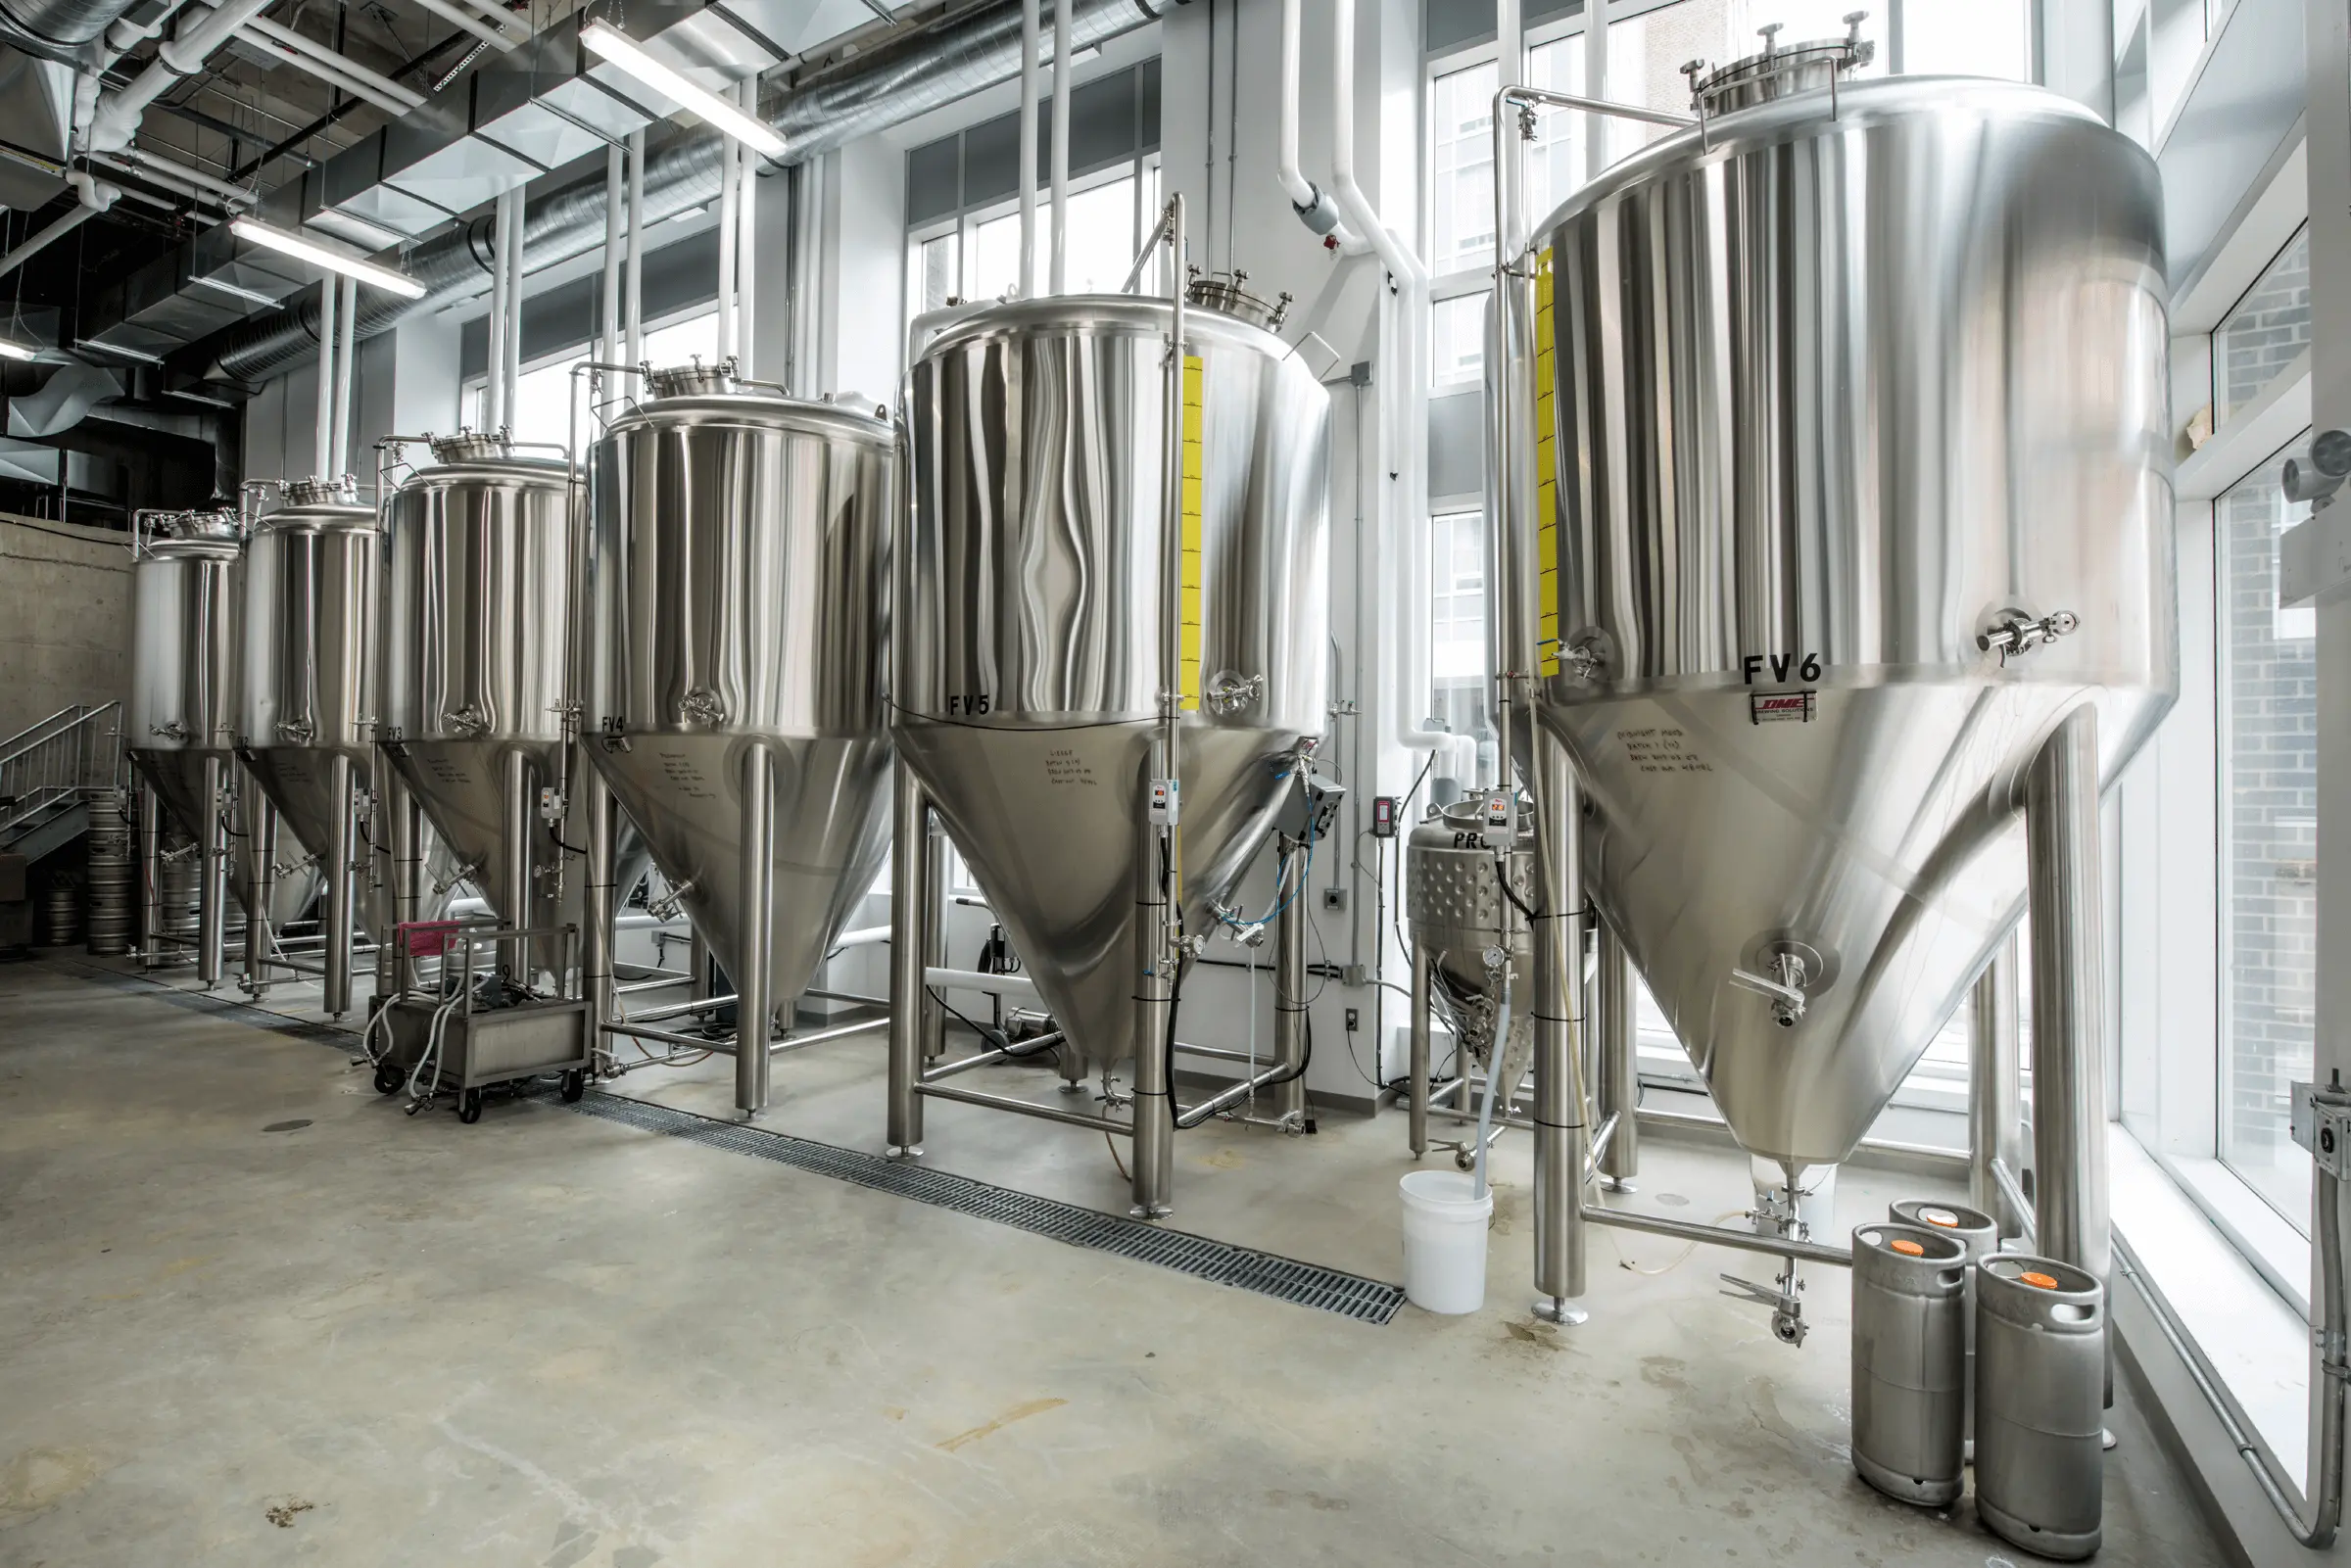 stainless steel brewing tanks